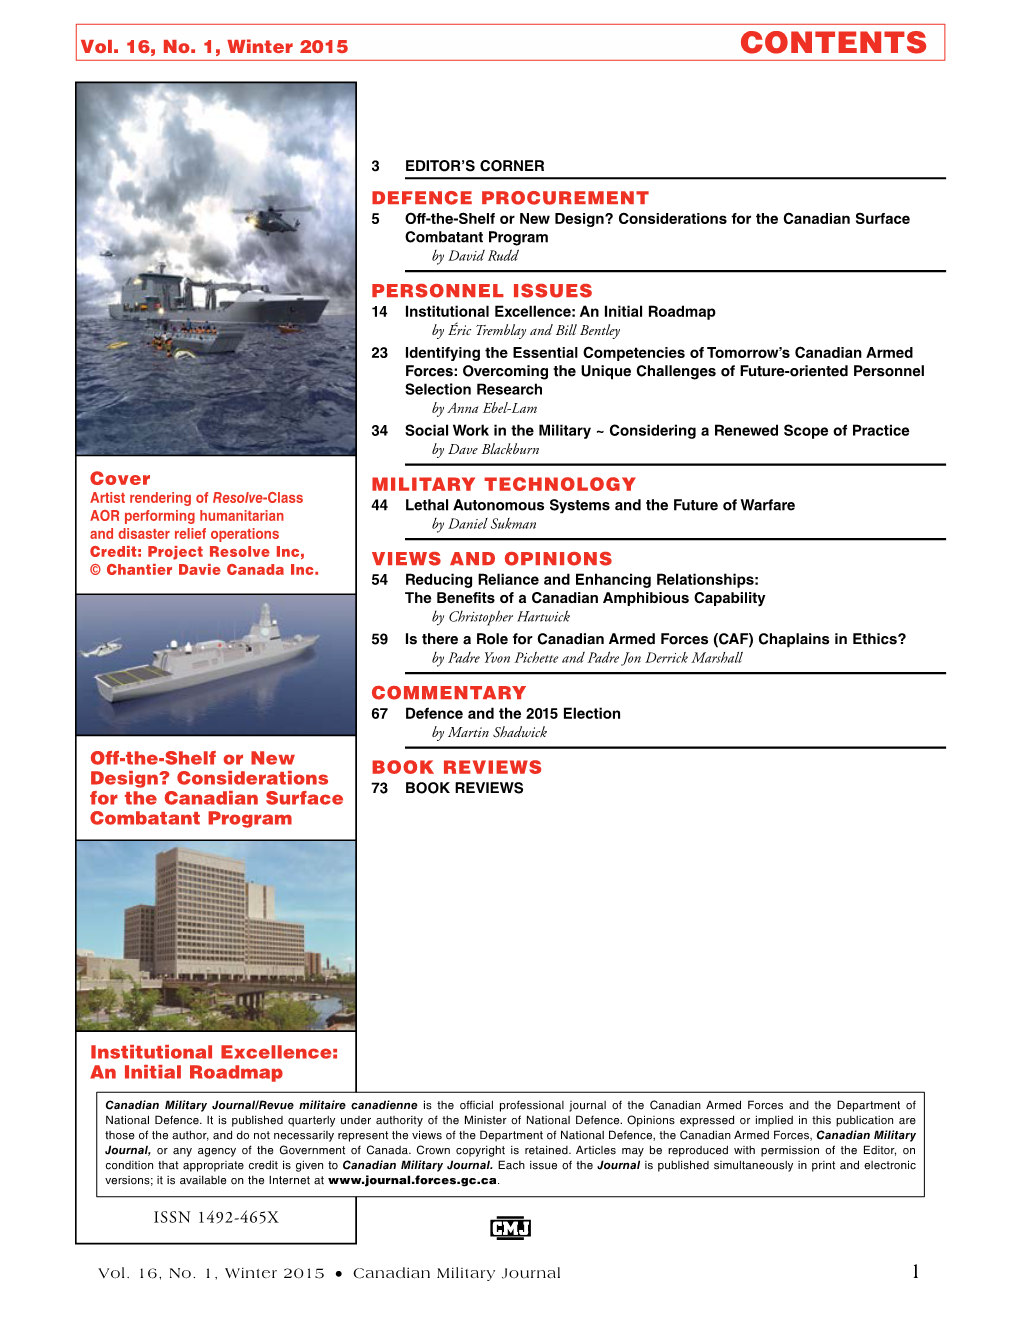 Canadian Military Journal, Issue 16, No 1